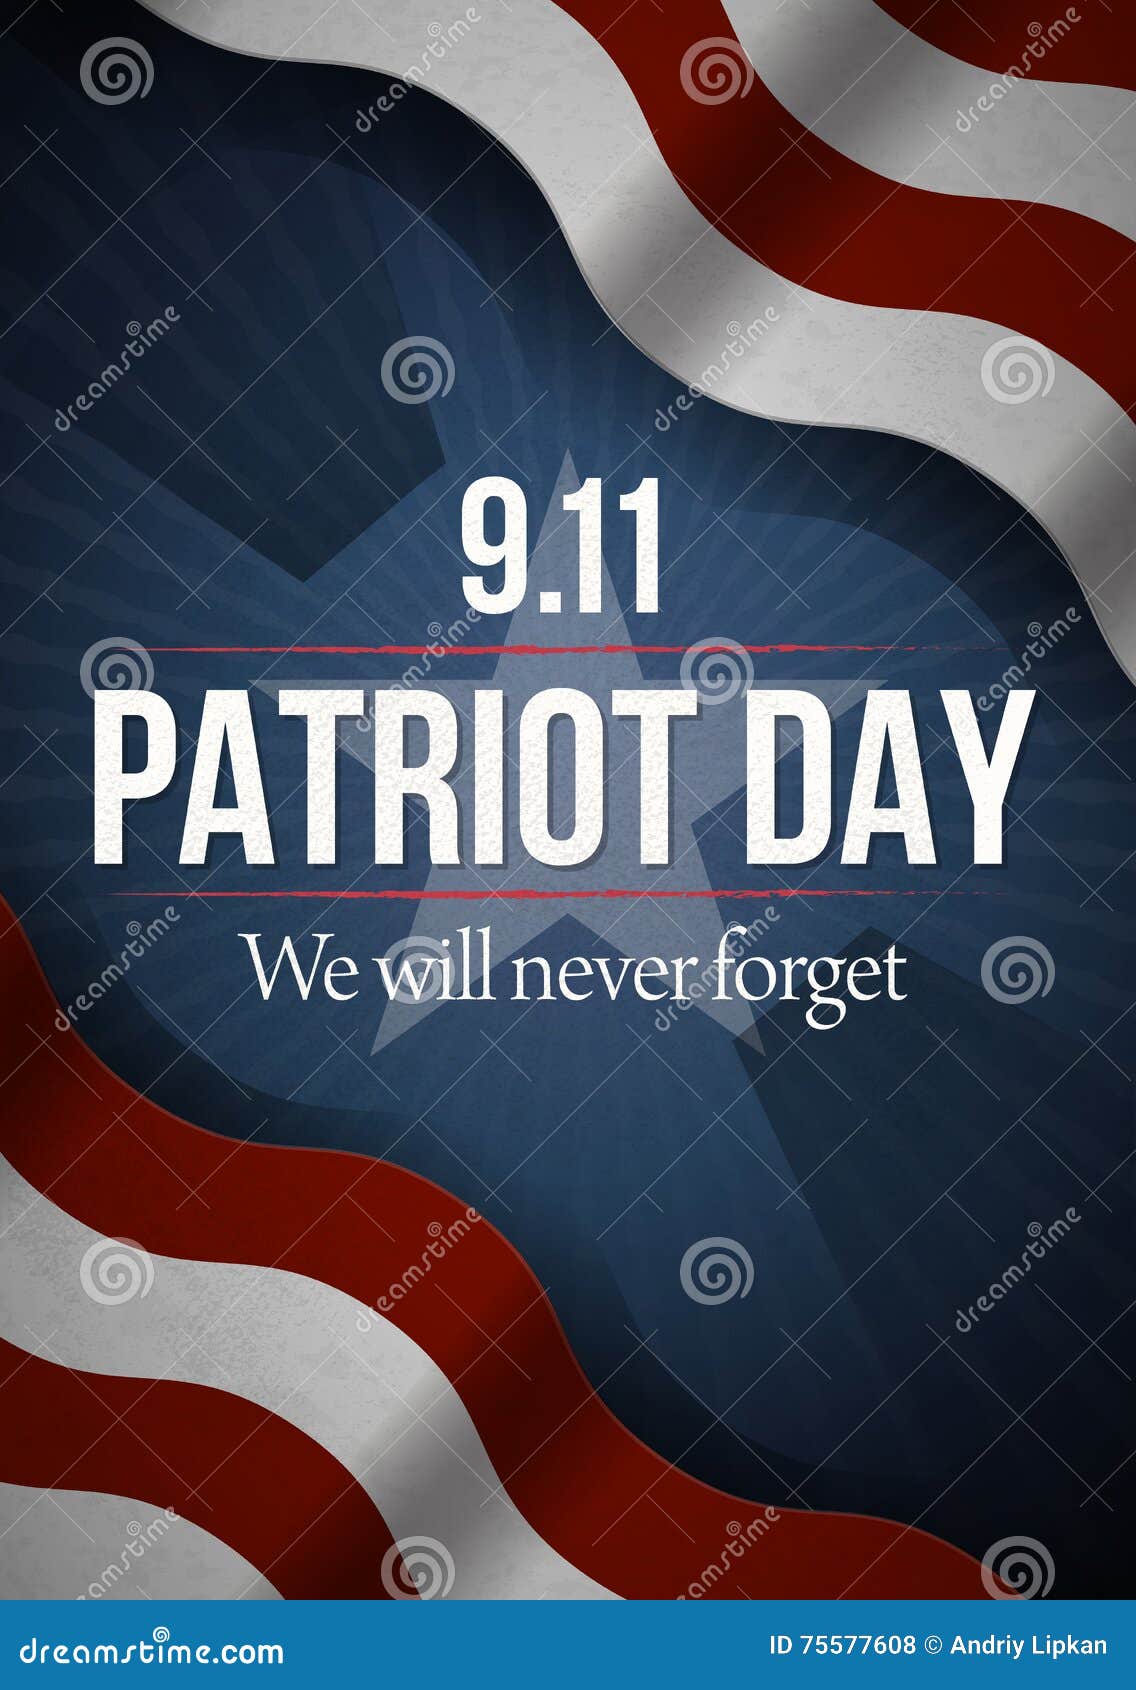 we will never forget. 9 11 patriot day background, american flag stripes background. patriot day september 11, 2001